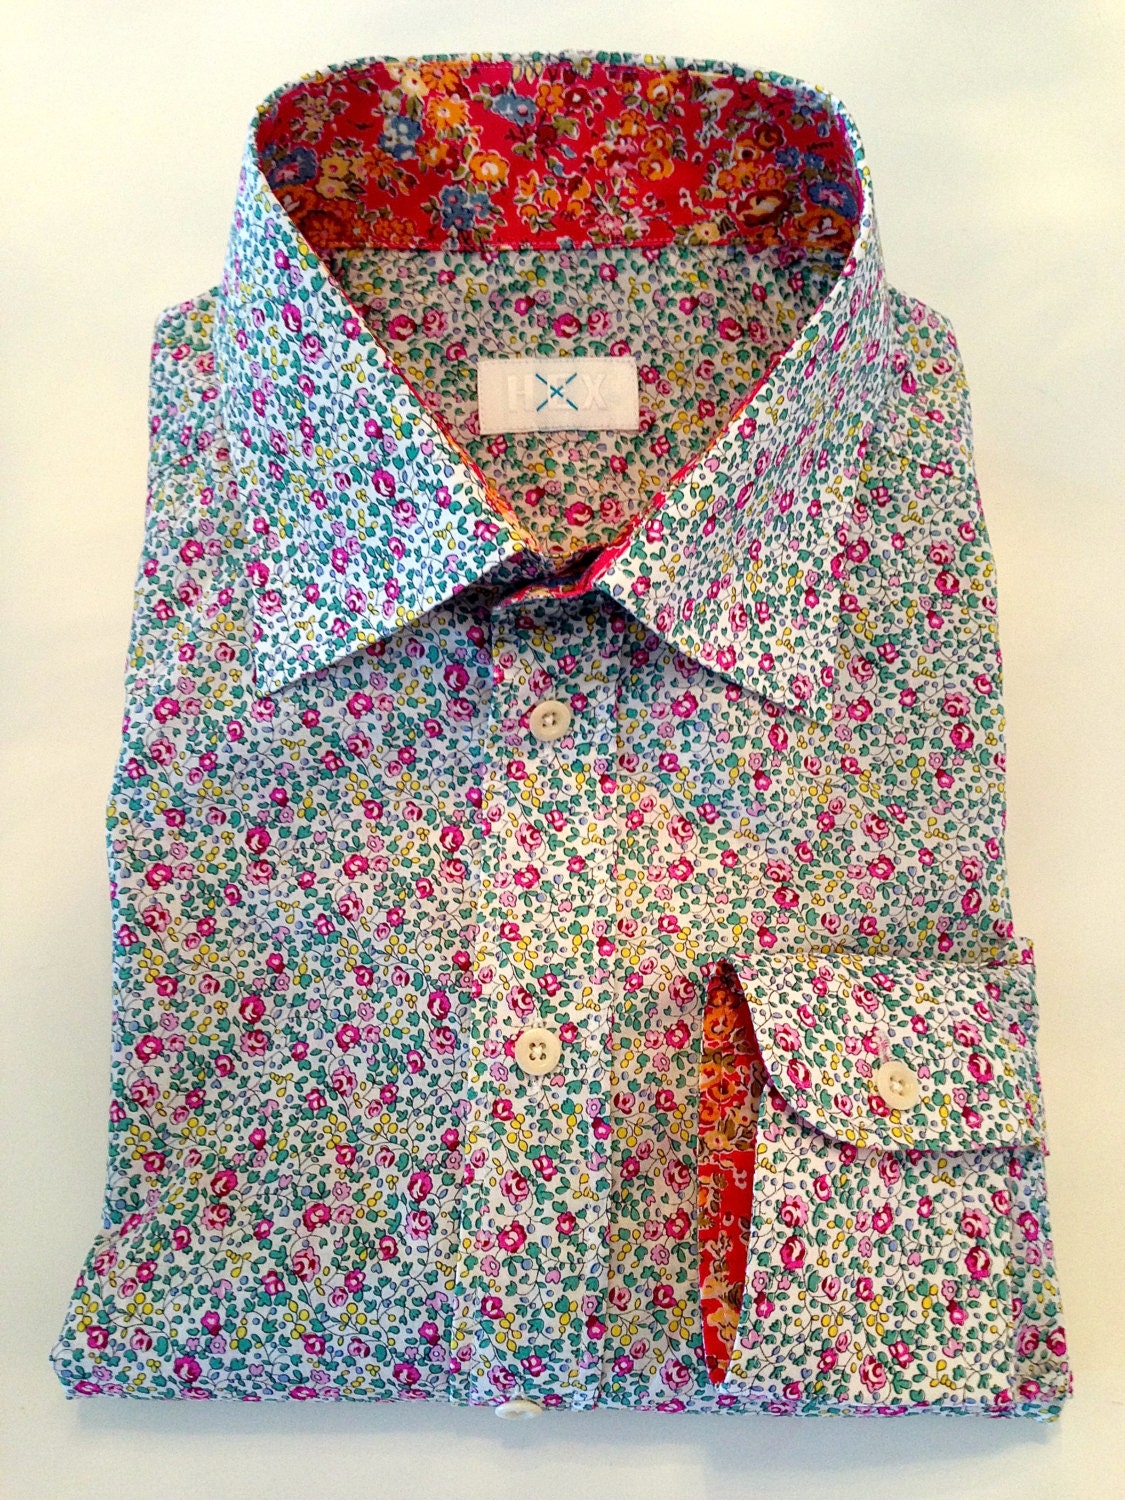 Exclusive Men Shirt in famous Liberty of London fabric design